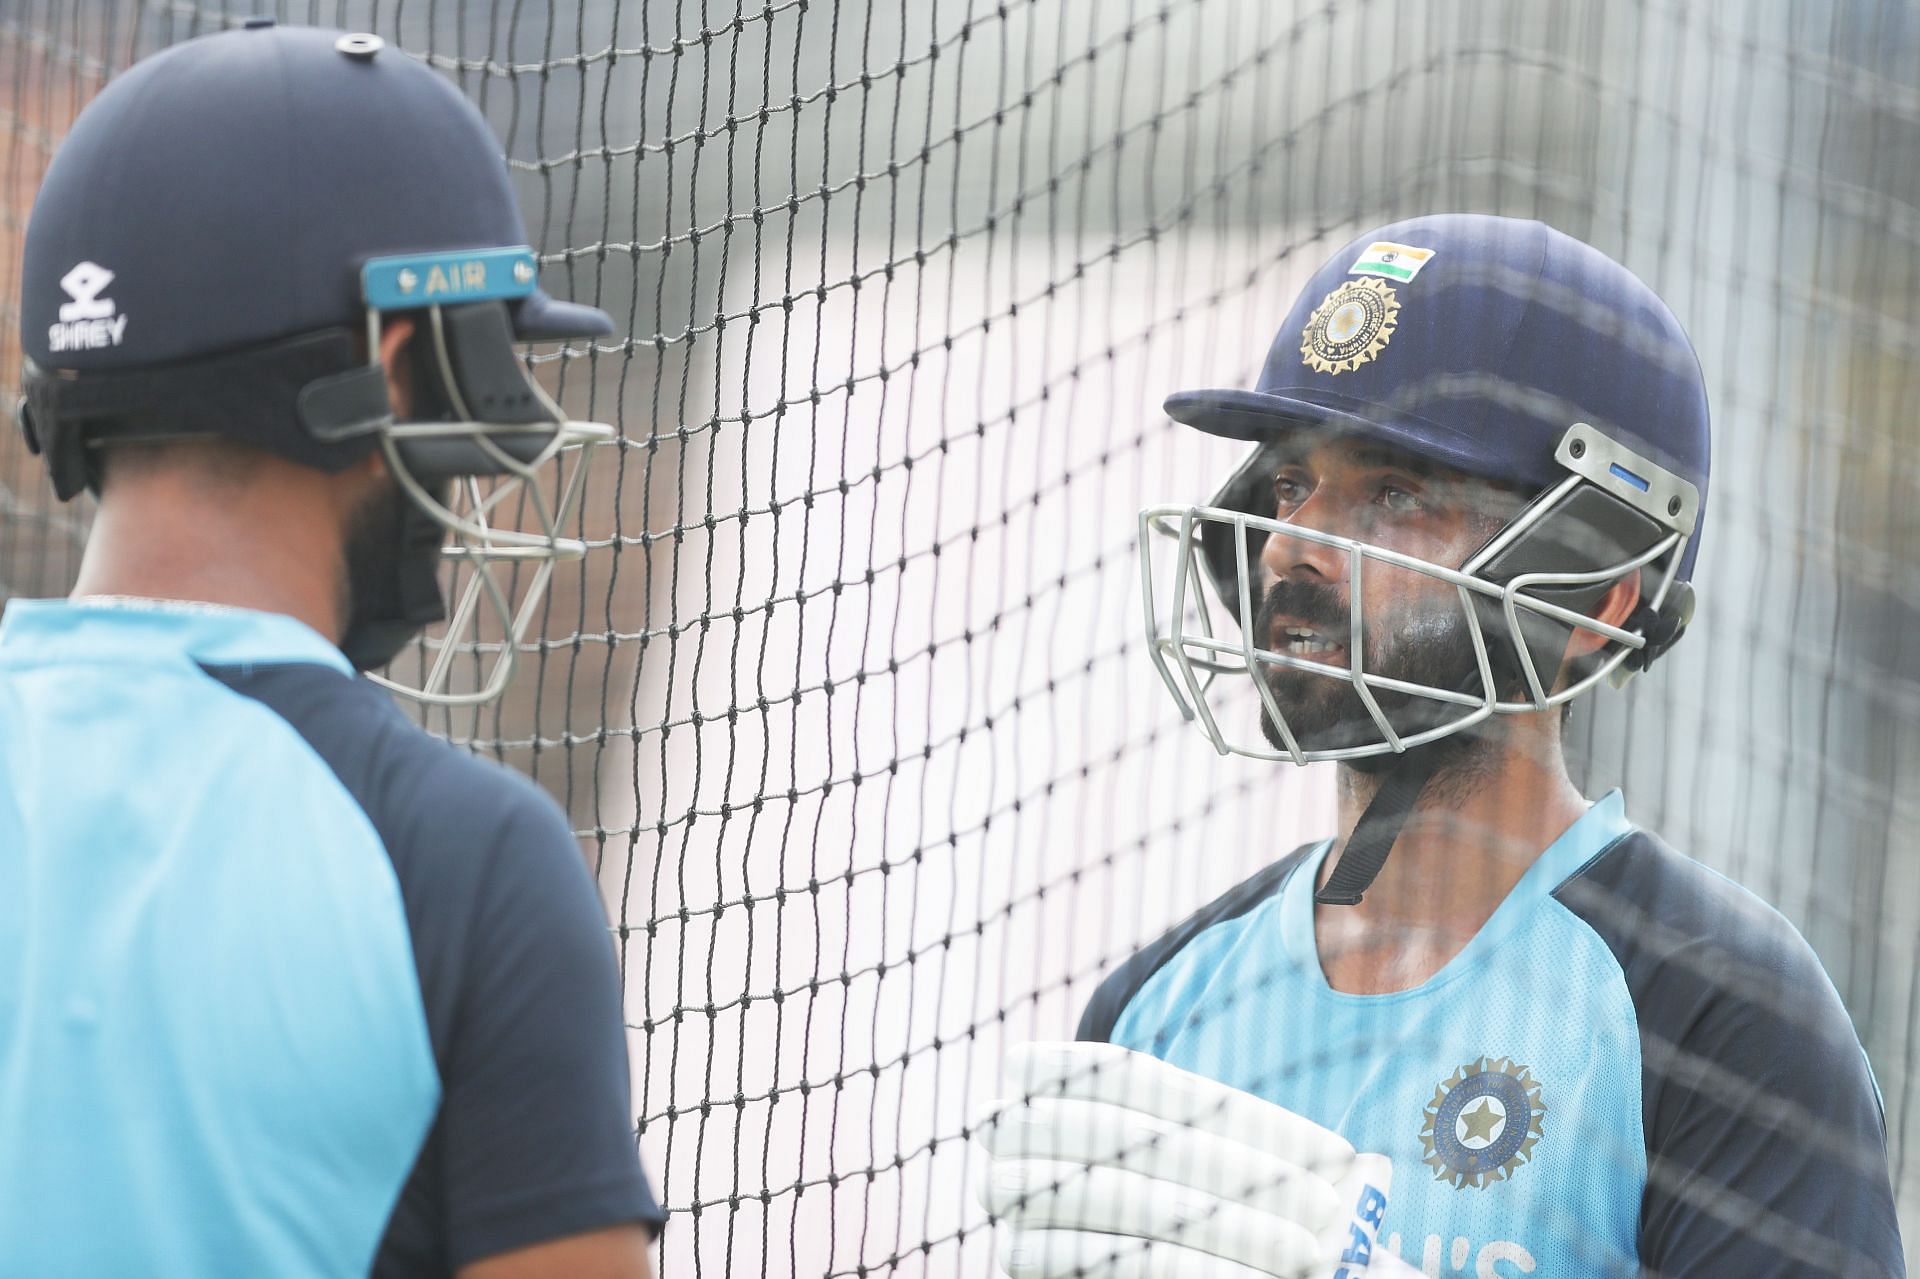 Ajinkya Rahane and Cheteshwar Pujara have been under some criticism in recent times.